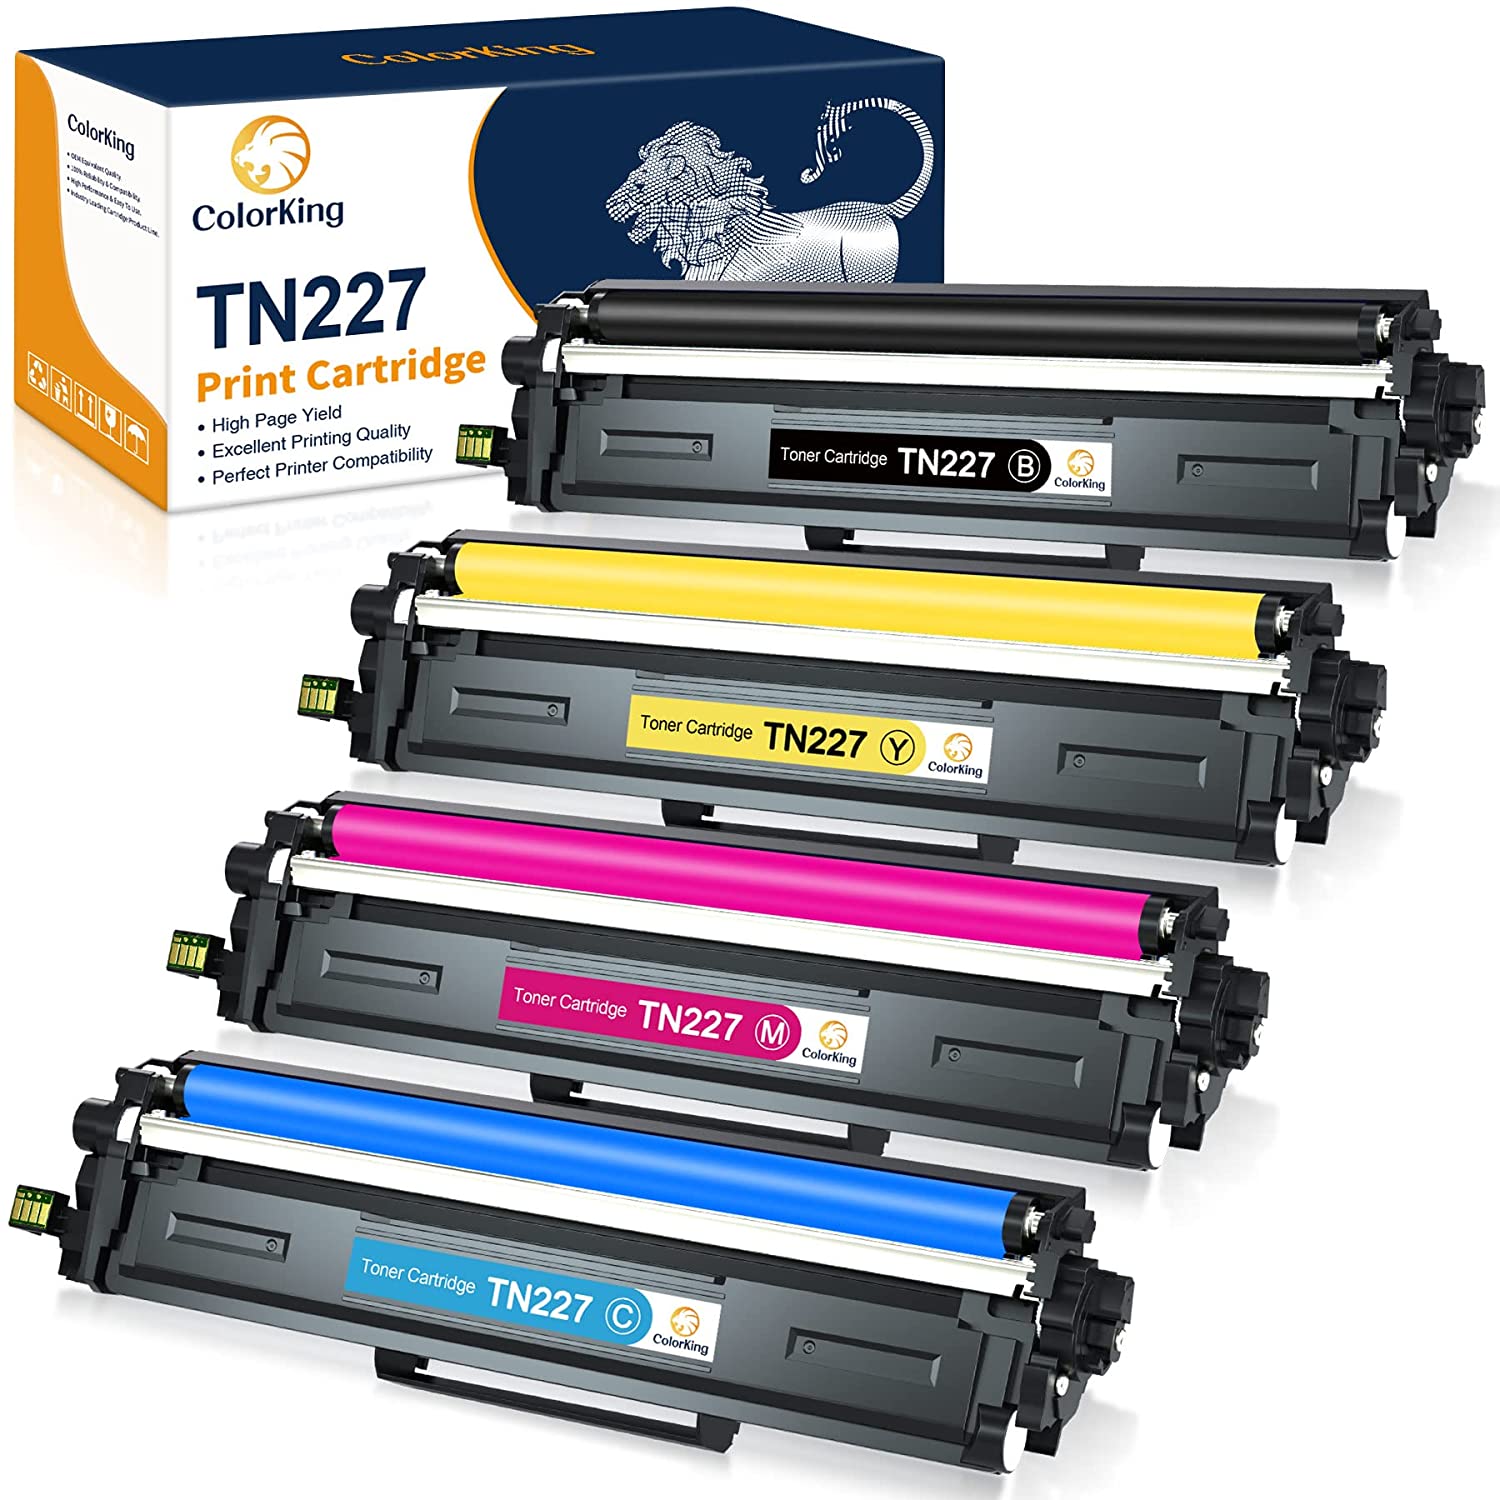 Compatible Toner-Cartridge Replacement For Brother Tn227 Tn227Bk Tn-227 Tn223 Tn223Bk For Mfc-L3750Cdw Hl-L3210Cw Hl-L3290Cd Hl-L3230Cdw Mfc-L3770Cdw Toner (Tn2..